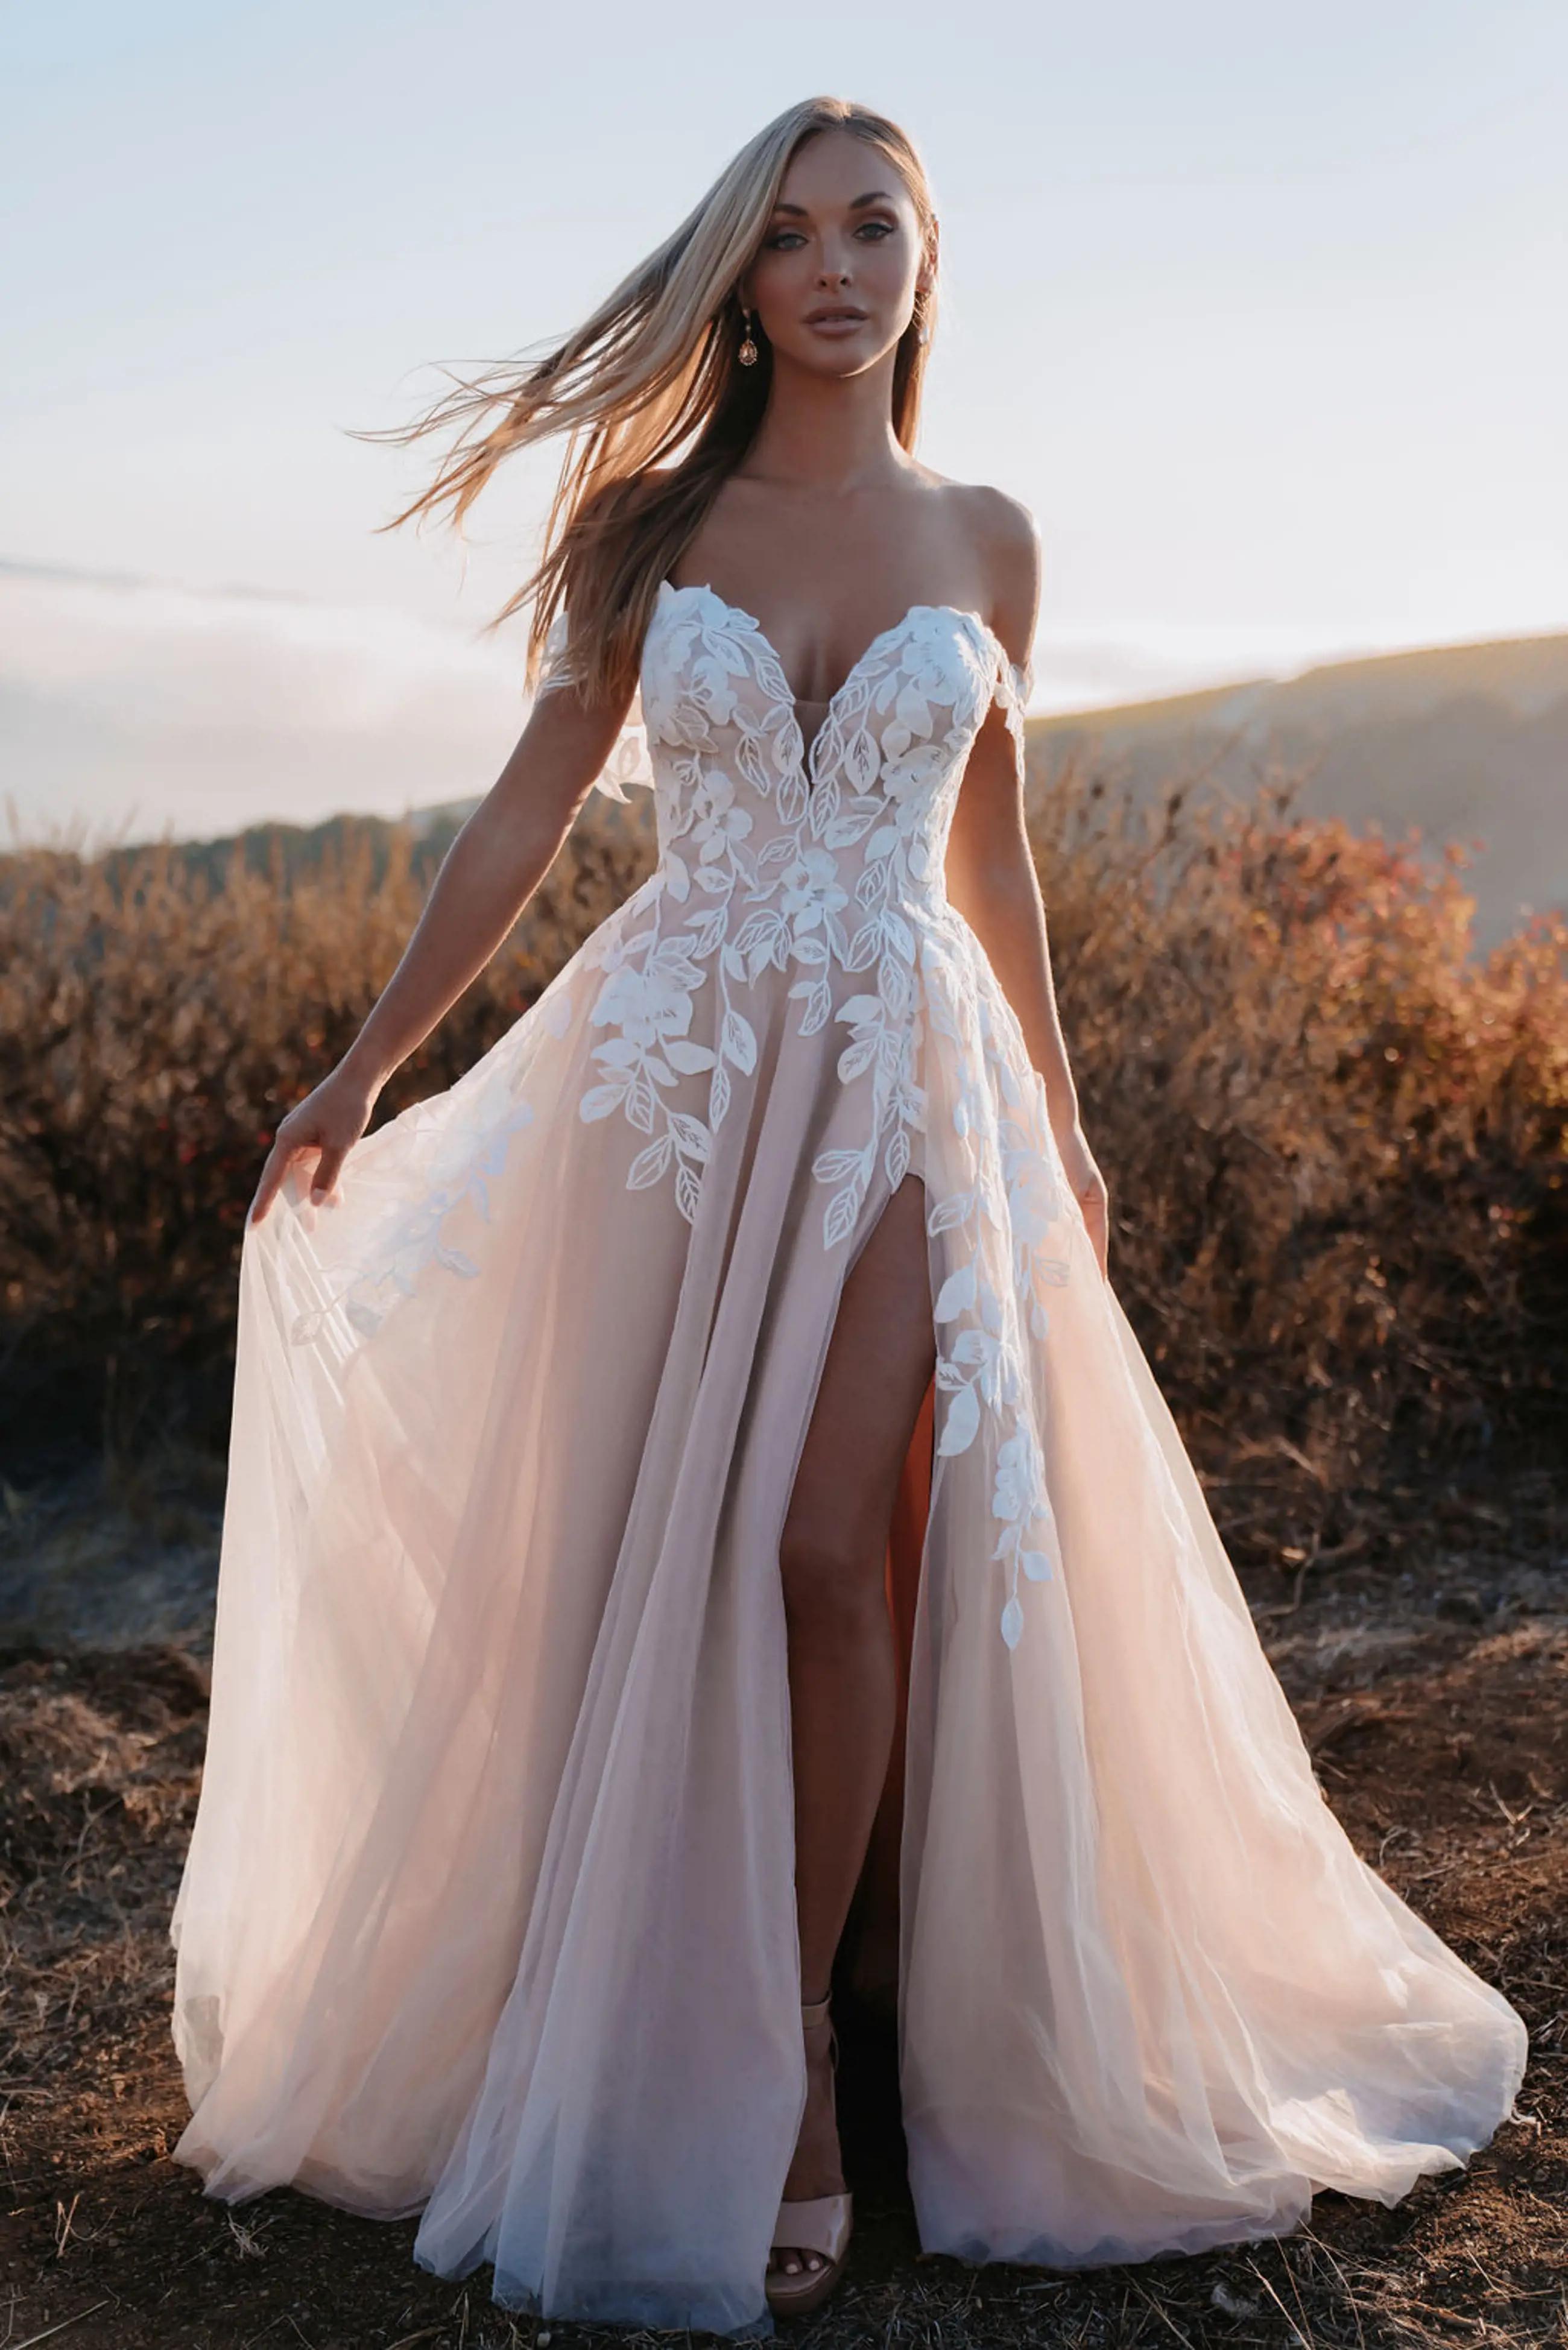 Need a Dress for Your Dream Venue? We Got You Covered! Image